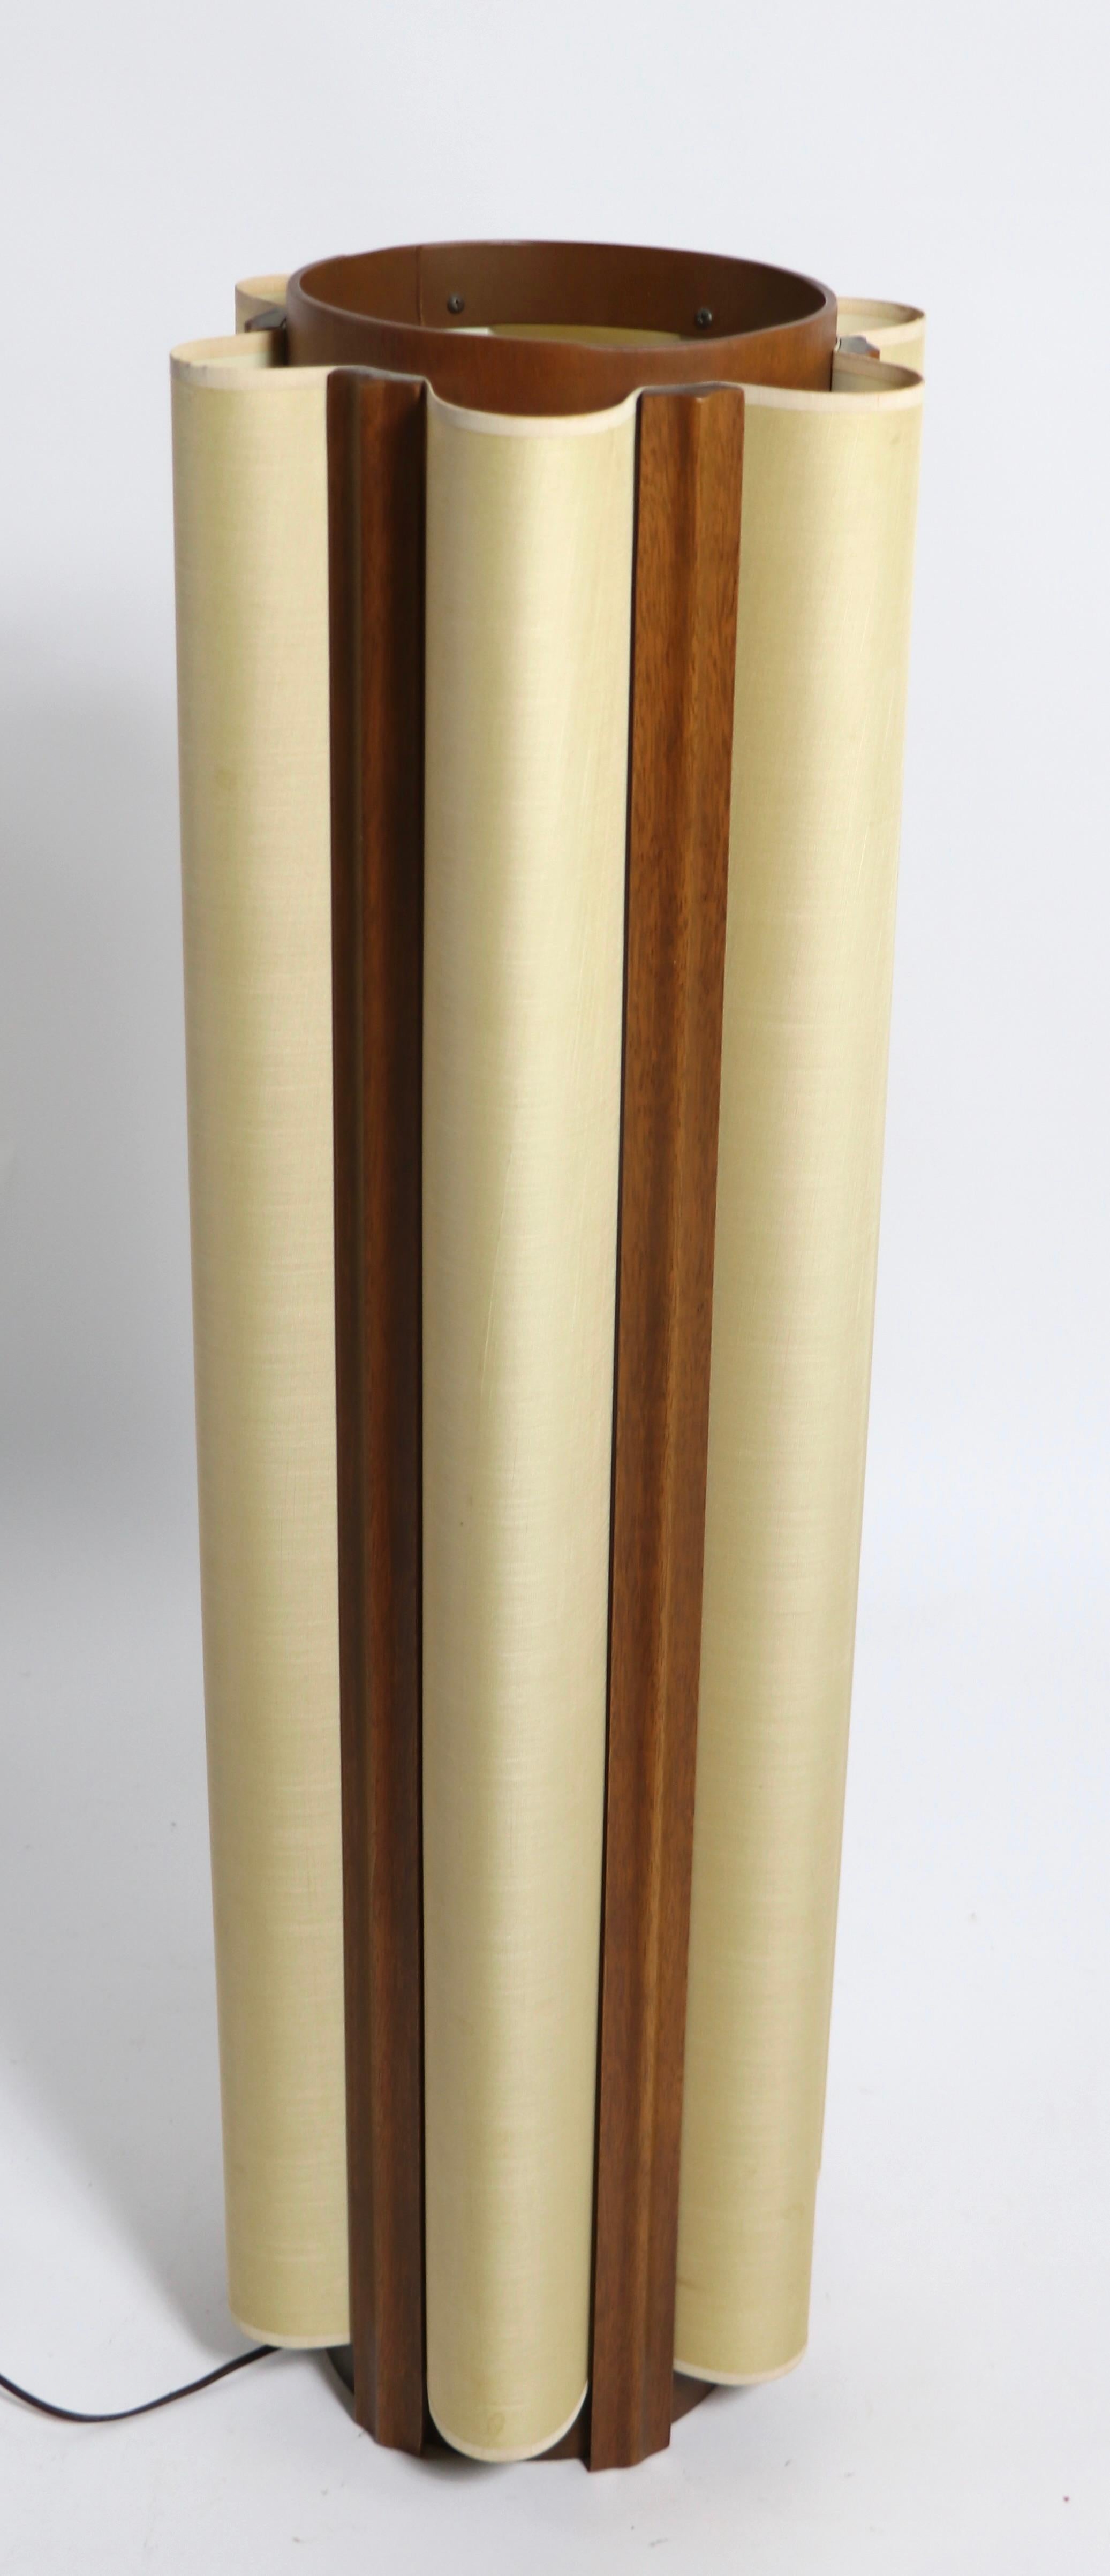 Extraordinary cylinder lamp having an undulating paper shade which surrounds the interior. The lamp has a wood frame, probably walnut, with vertical wood trim elements. The interior has two sockets, an upper and a lower, which can be operated